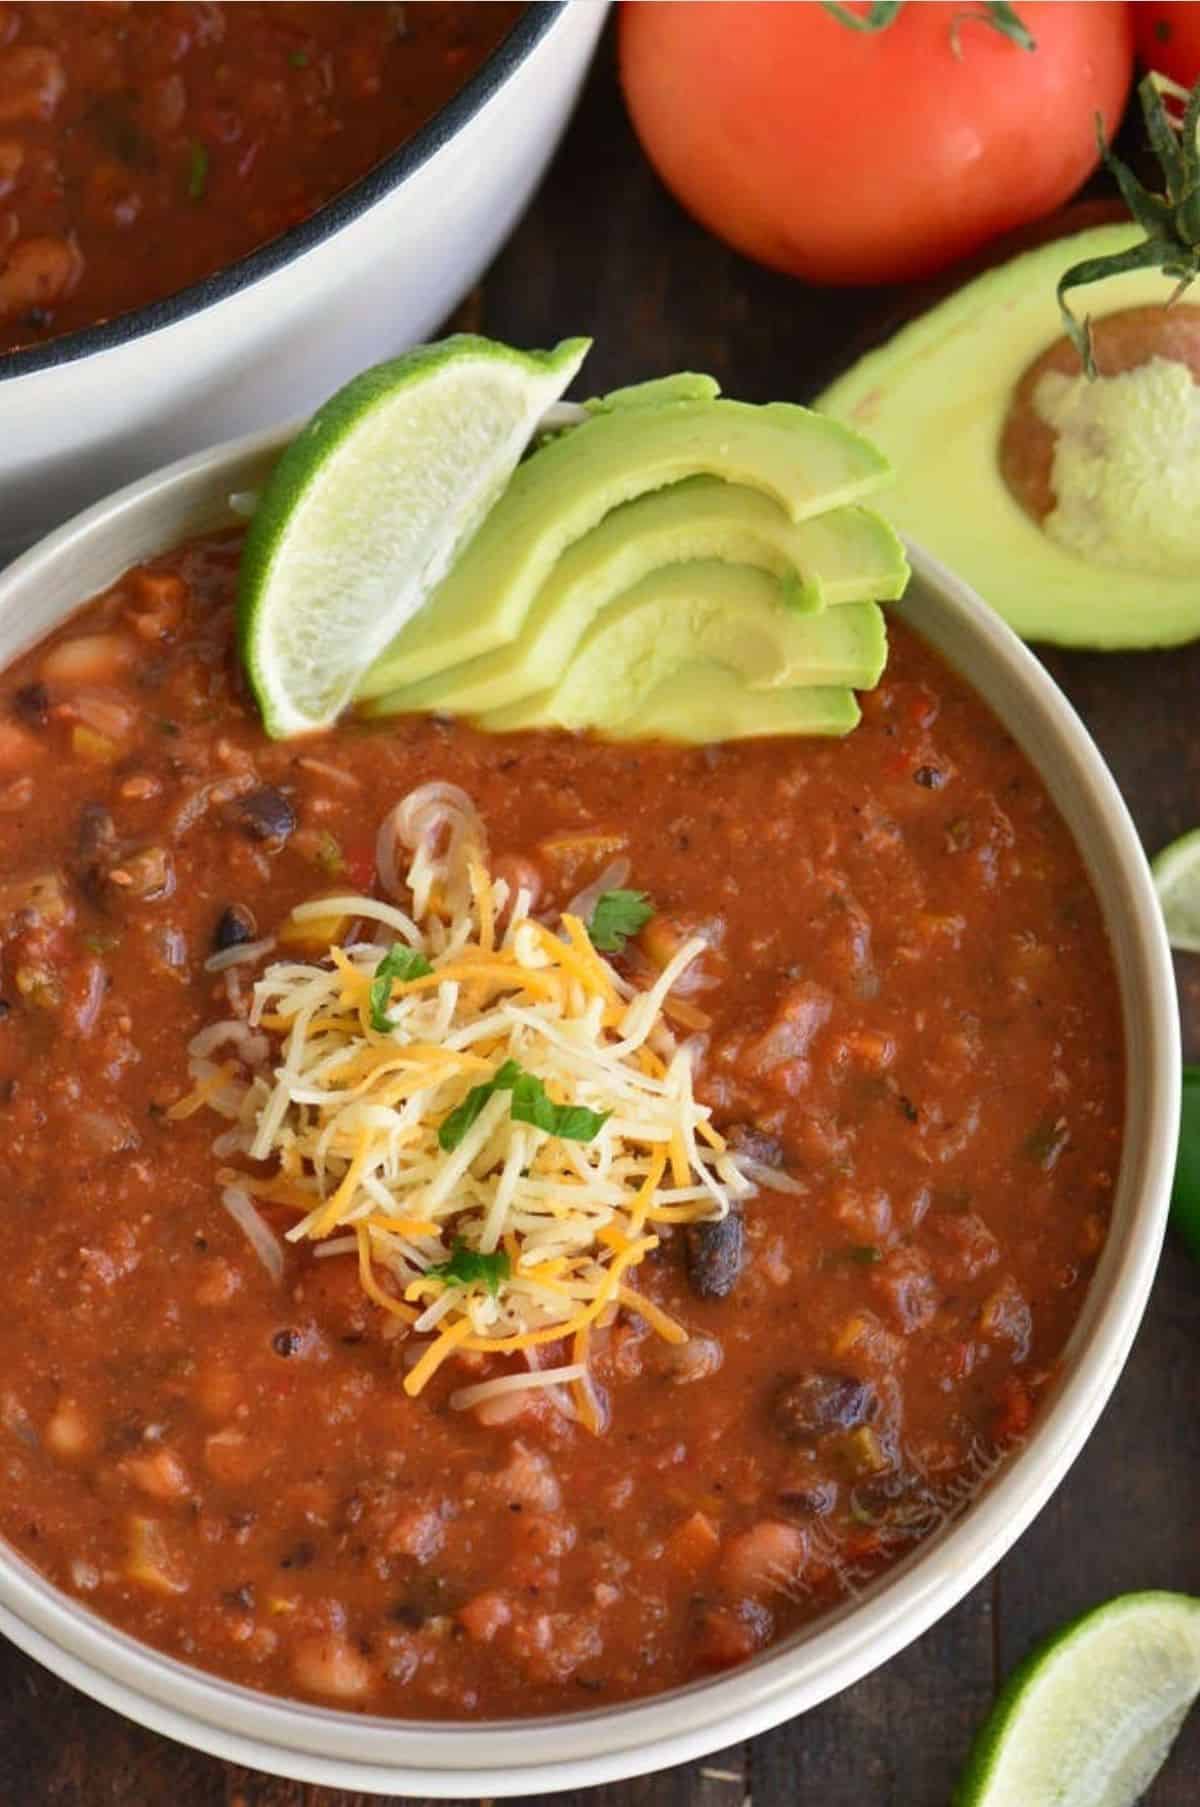 Vegetarian chili in a bowl with shredded cheese, lime, and avocado as garnish with tomato and avocado in the background.